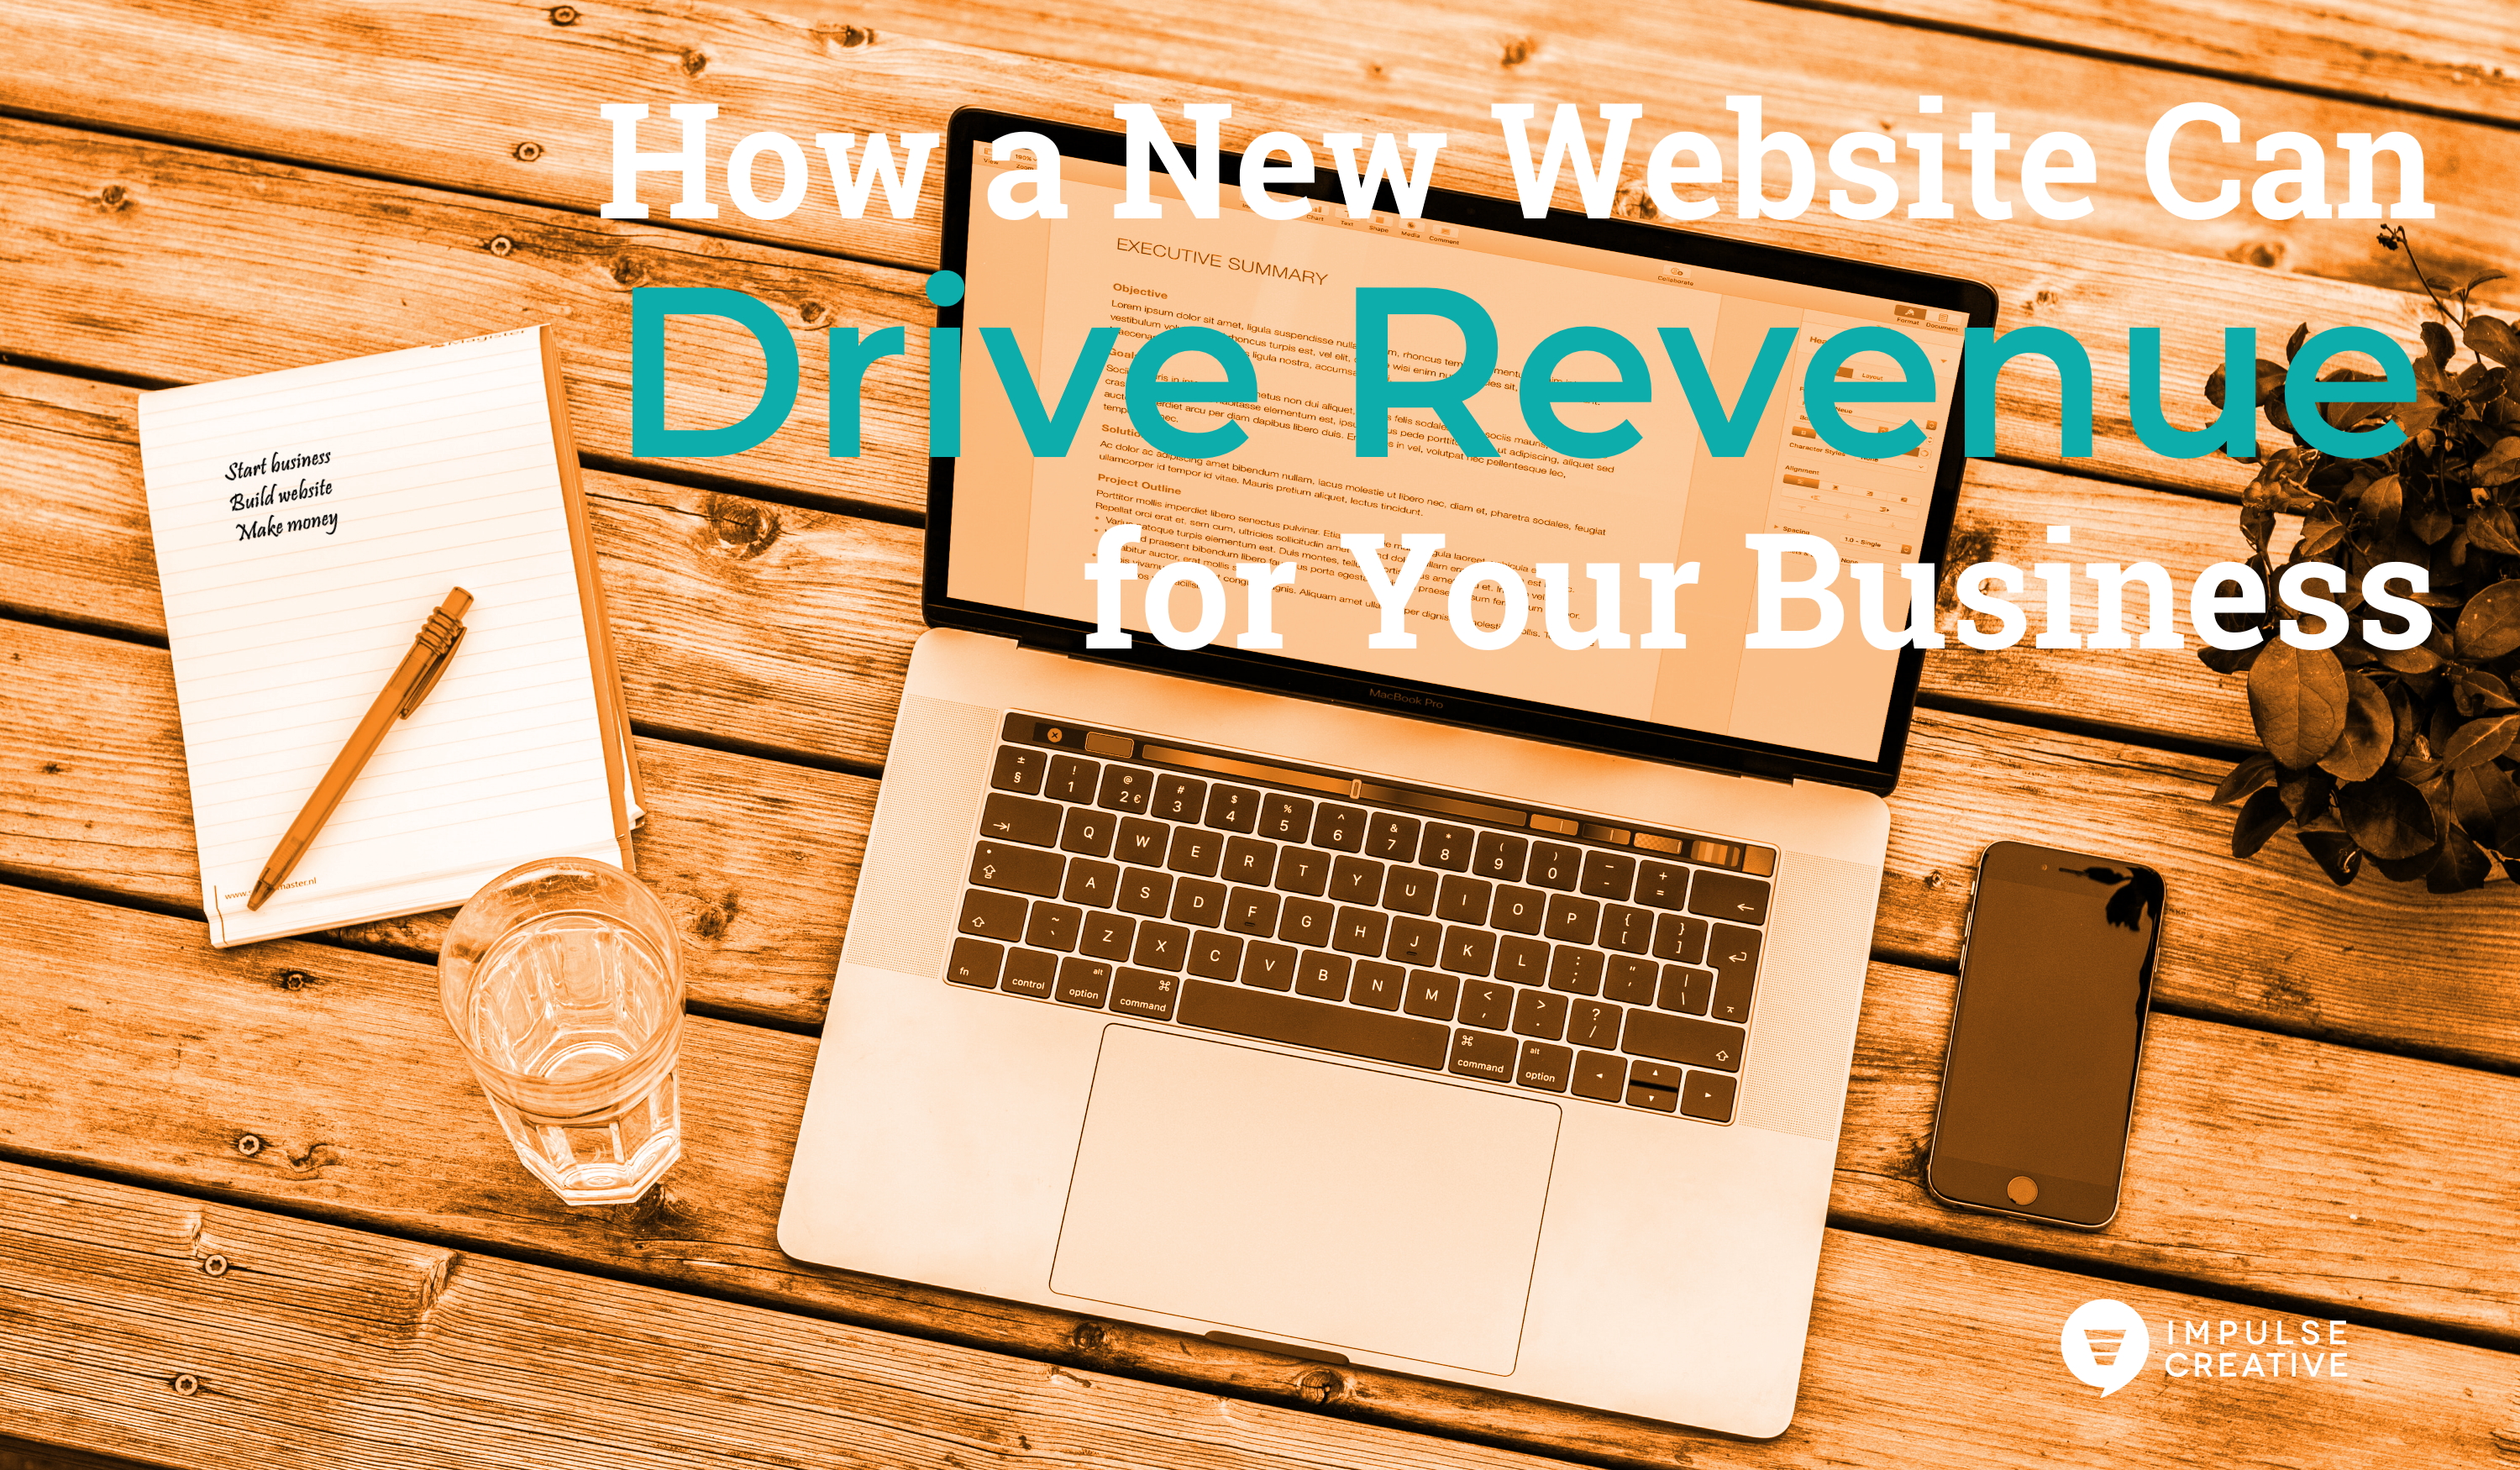 how-a-new-website-can-drive-revenue